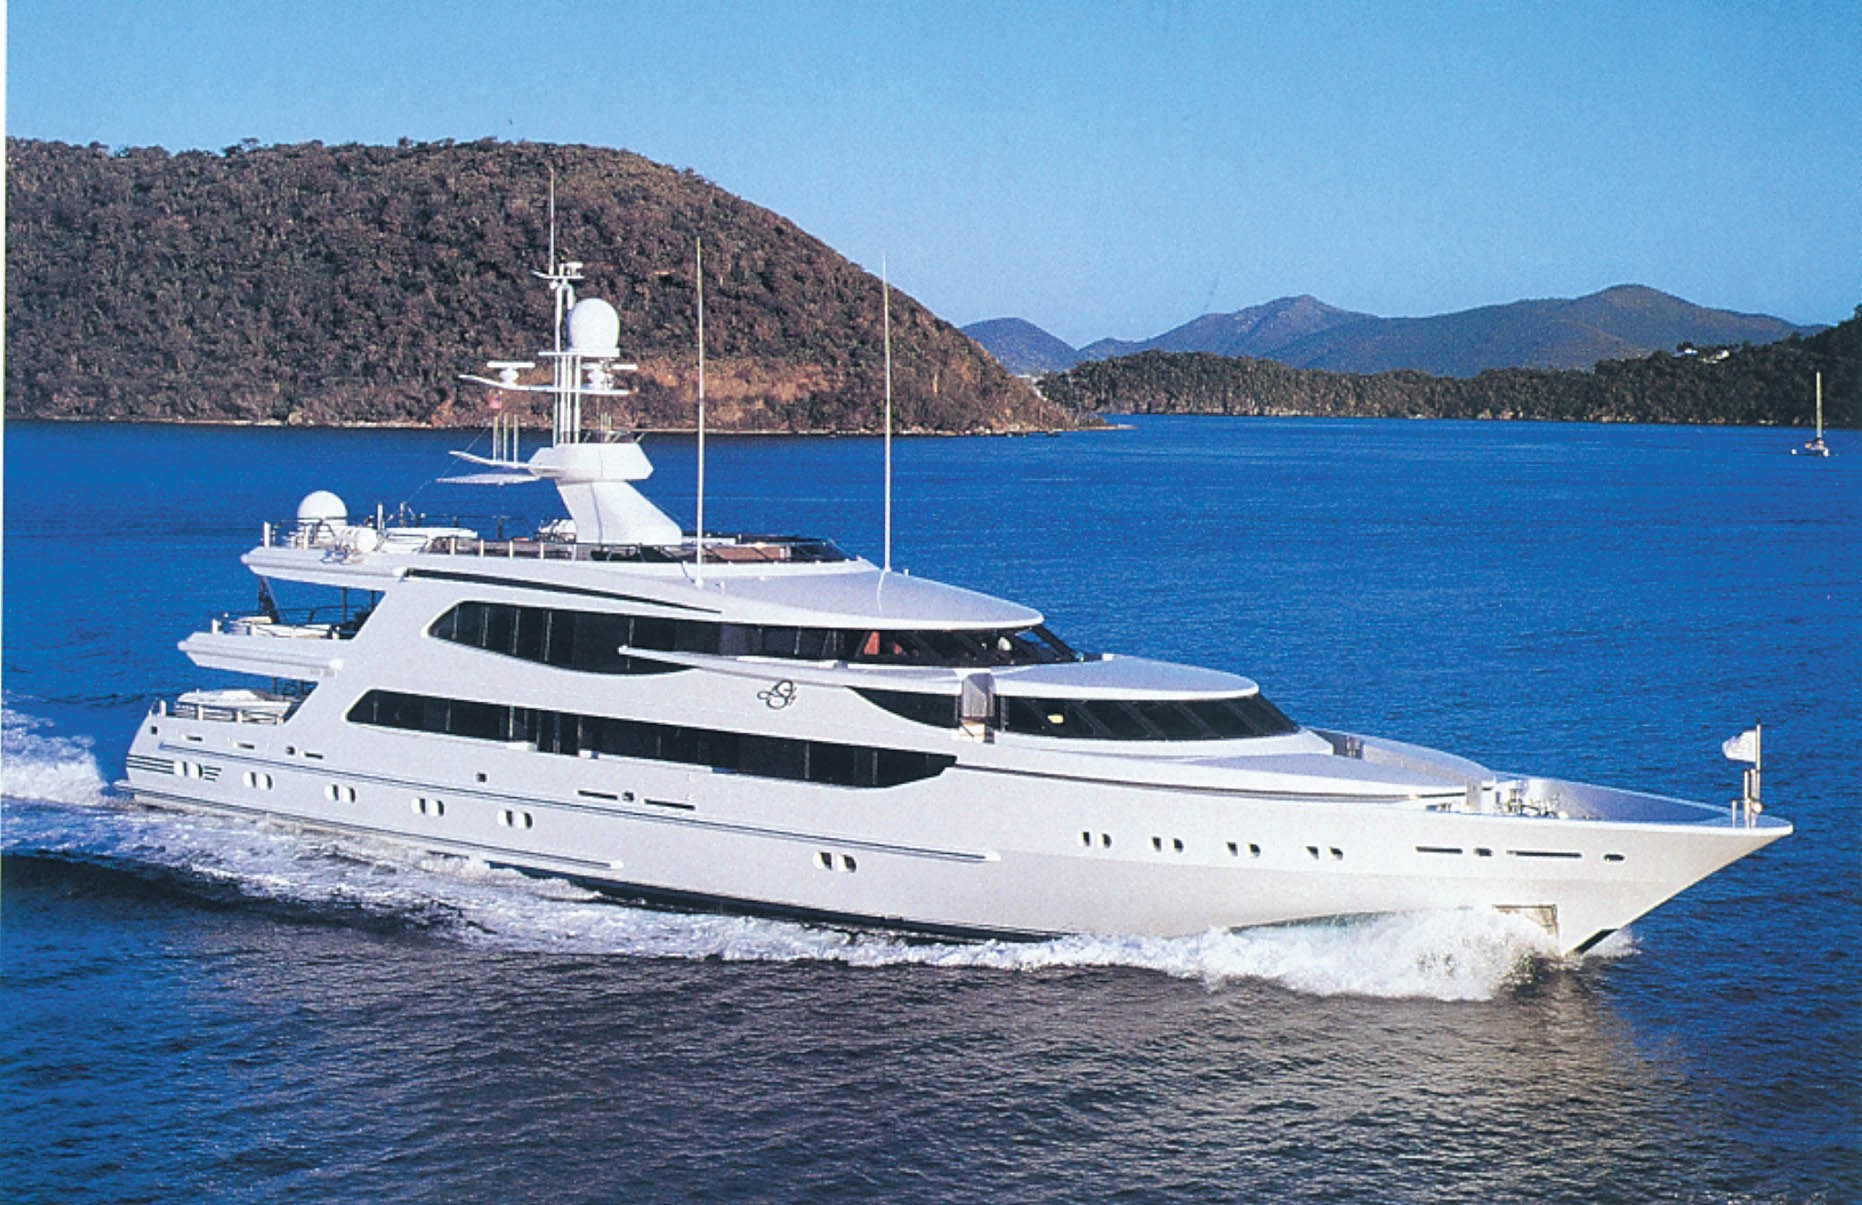 Oceanco <strong>Lazy Z -ex Accolade - ex Lady S</strong> (Motor Yacht)